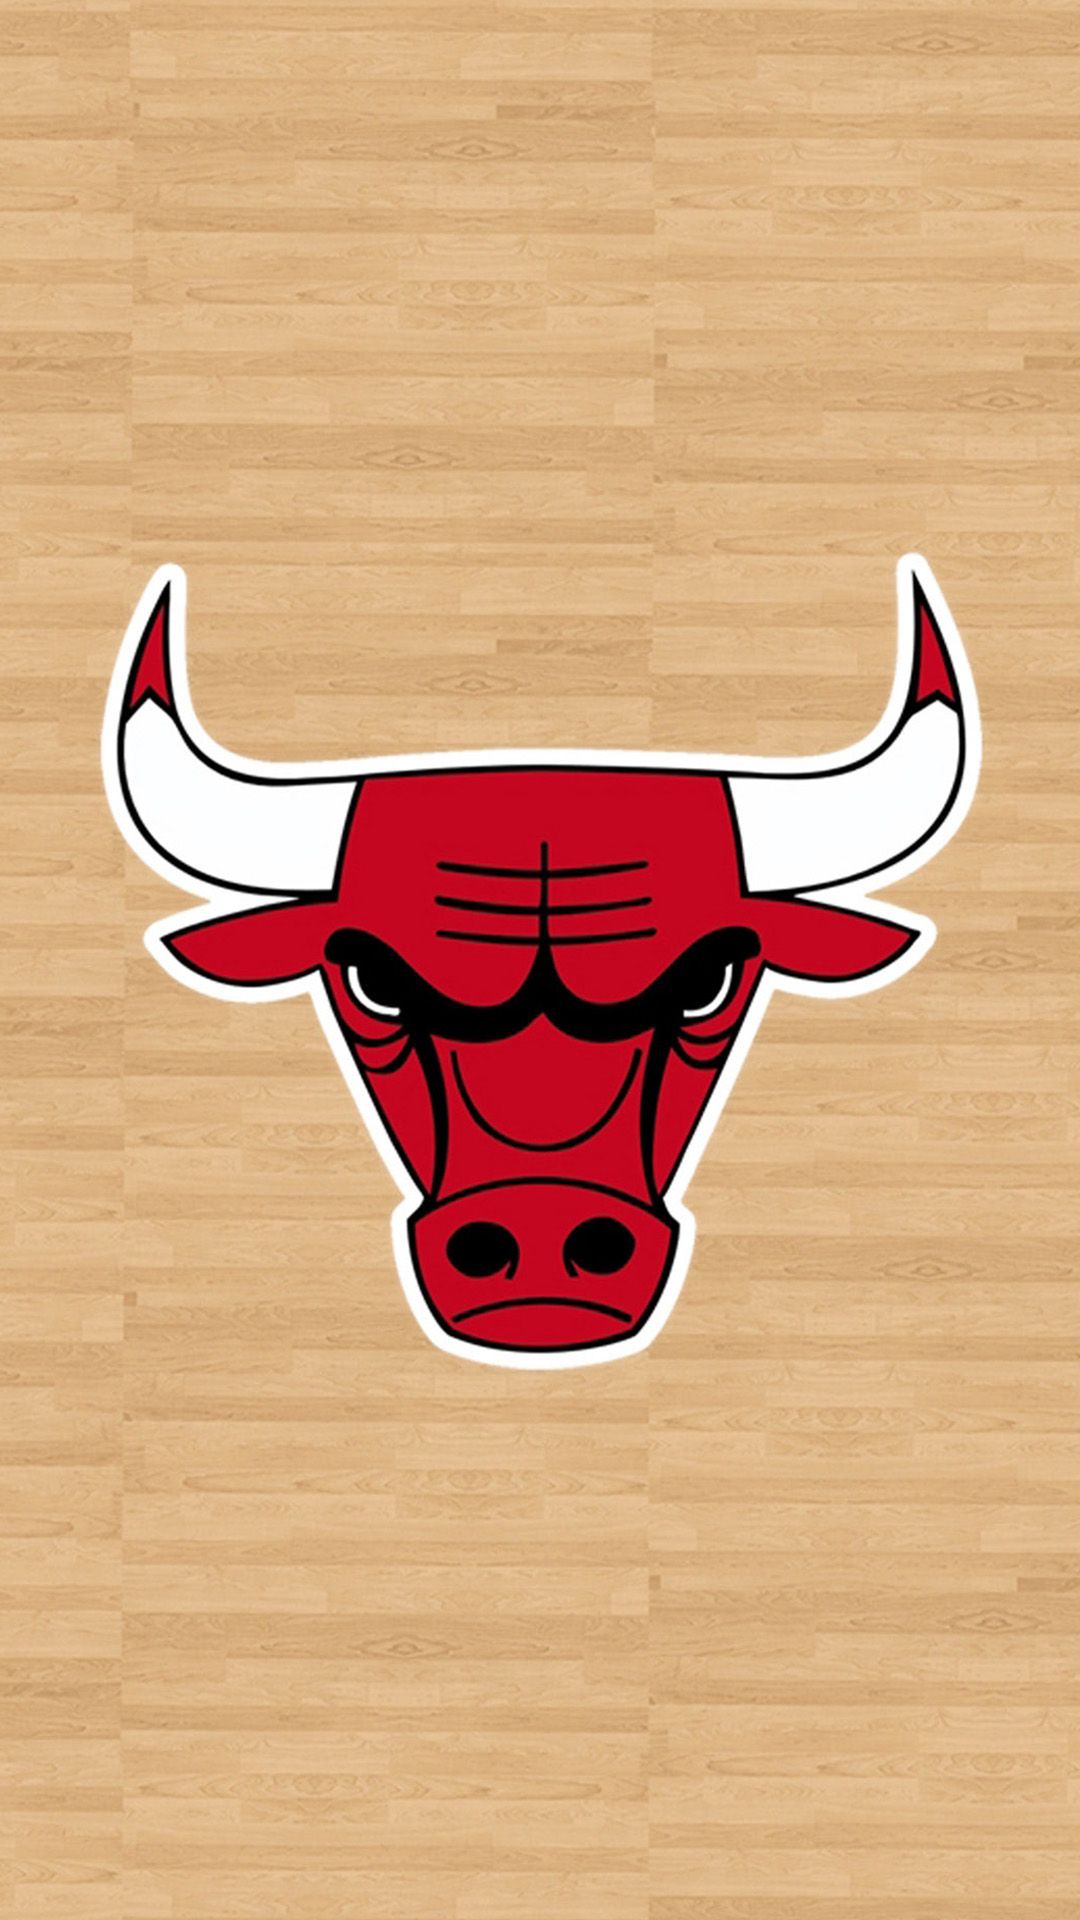 Chicago Bulls - Best htc one wallpapers, free and easy to download